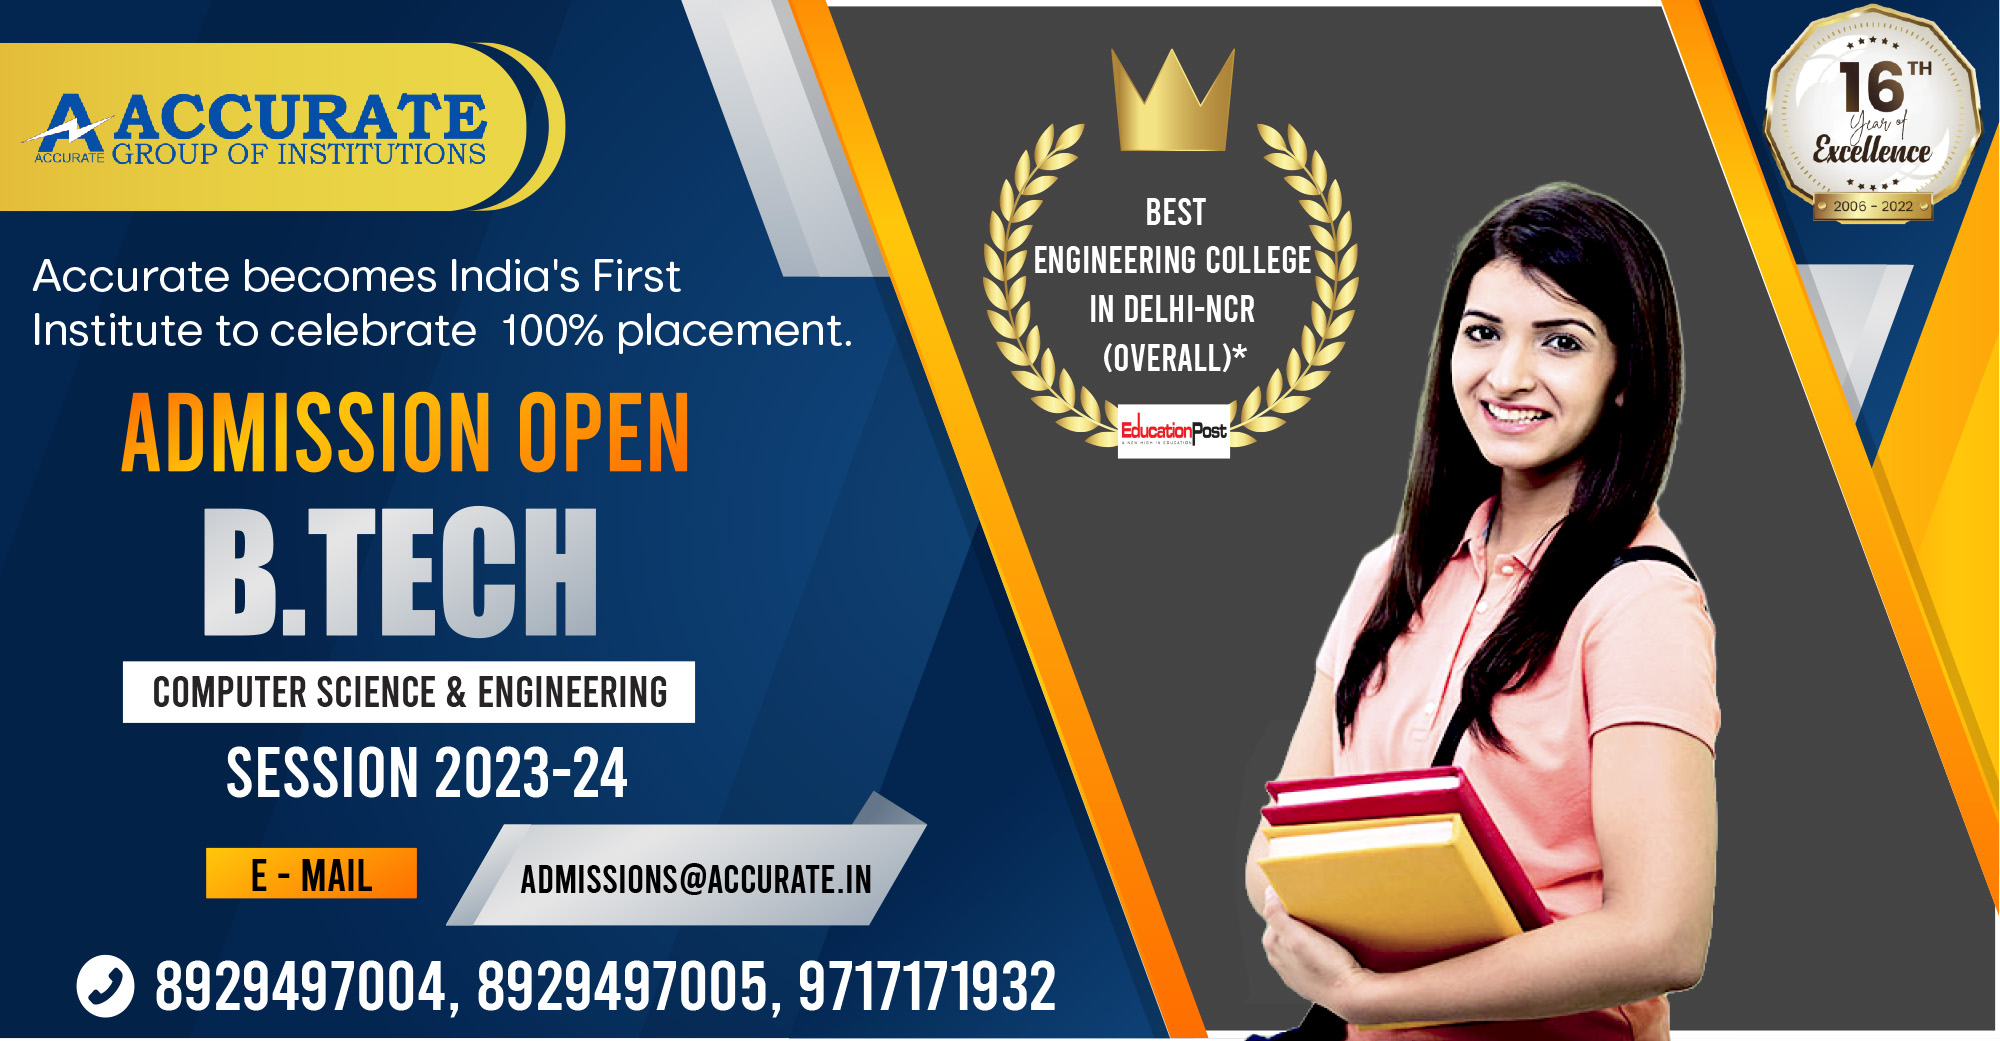 Admission open for B.Tech Session 2023-24